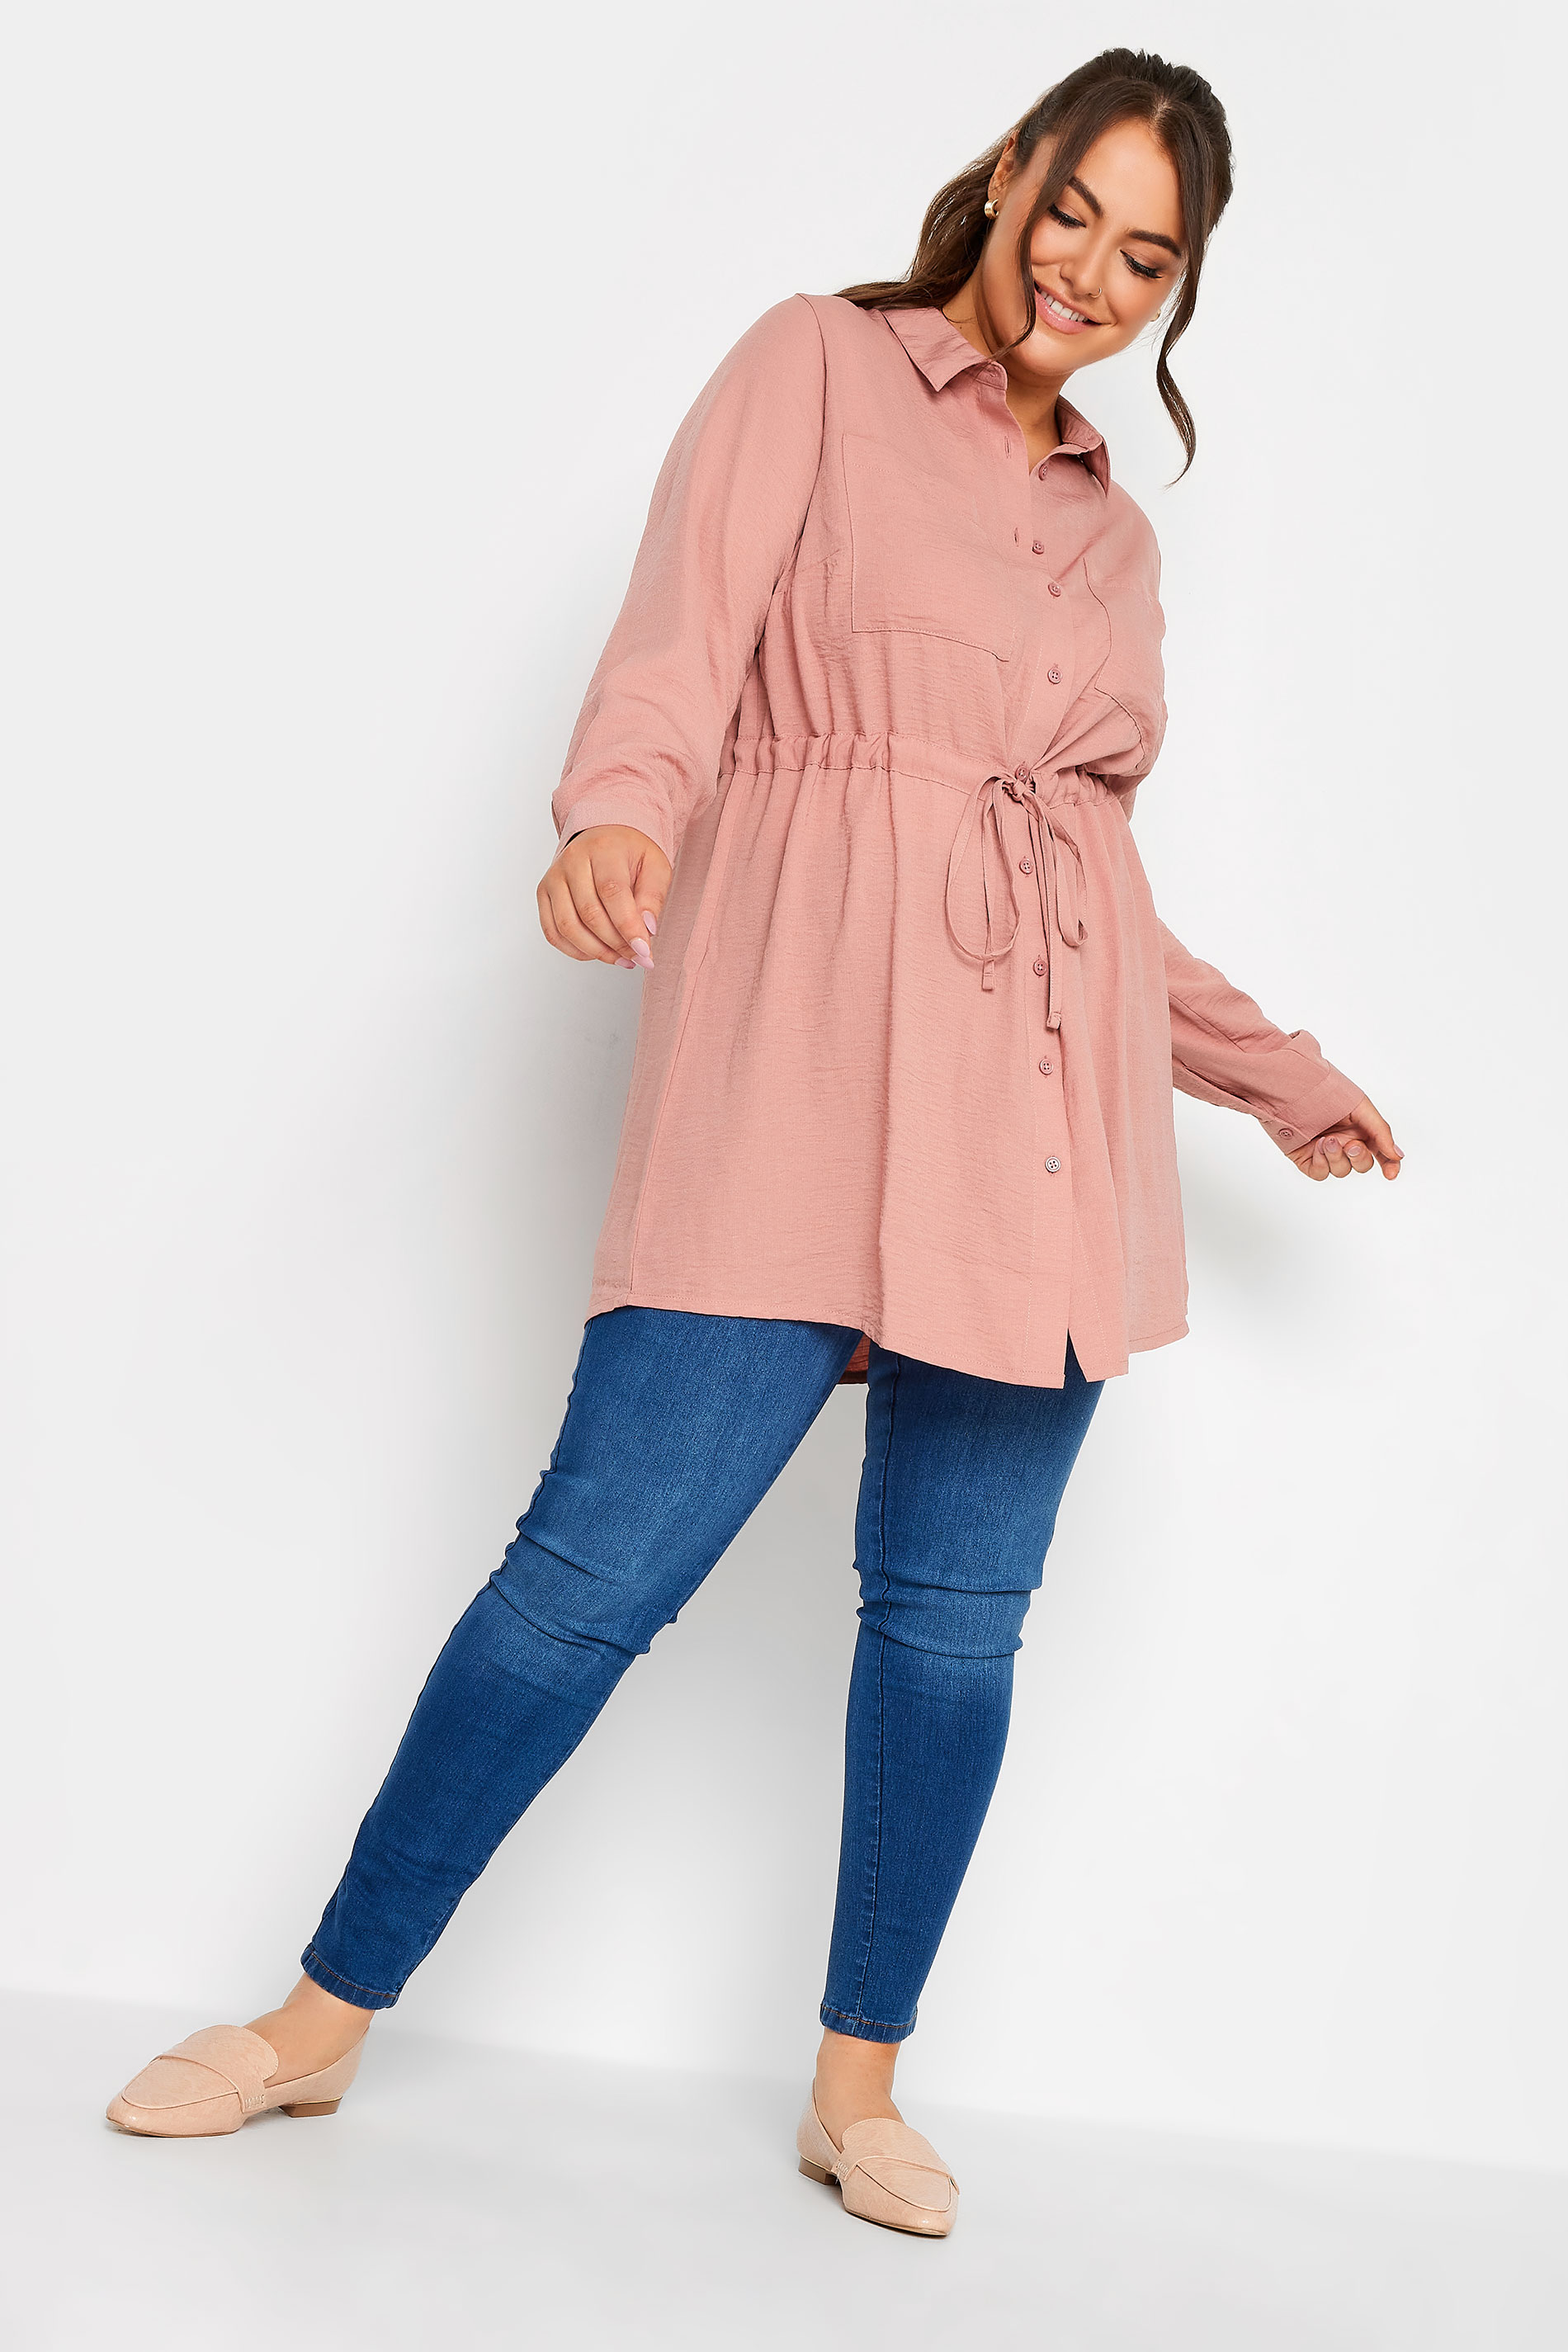 YOURS Curve Plus Size Pink Utility Tunic Shirt | Yours Clothing  3